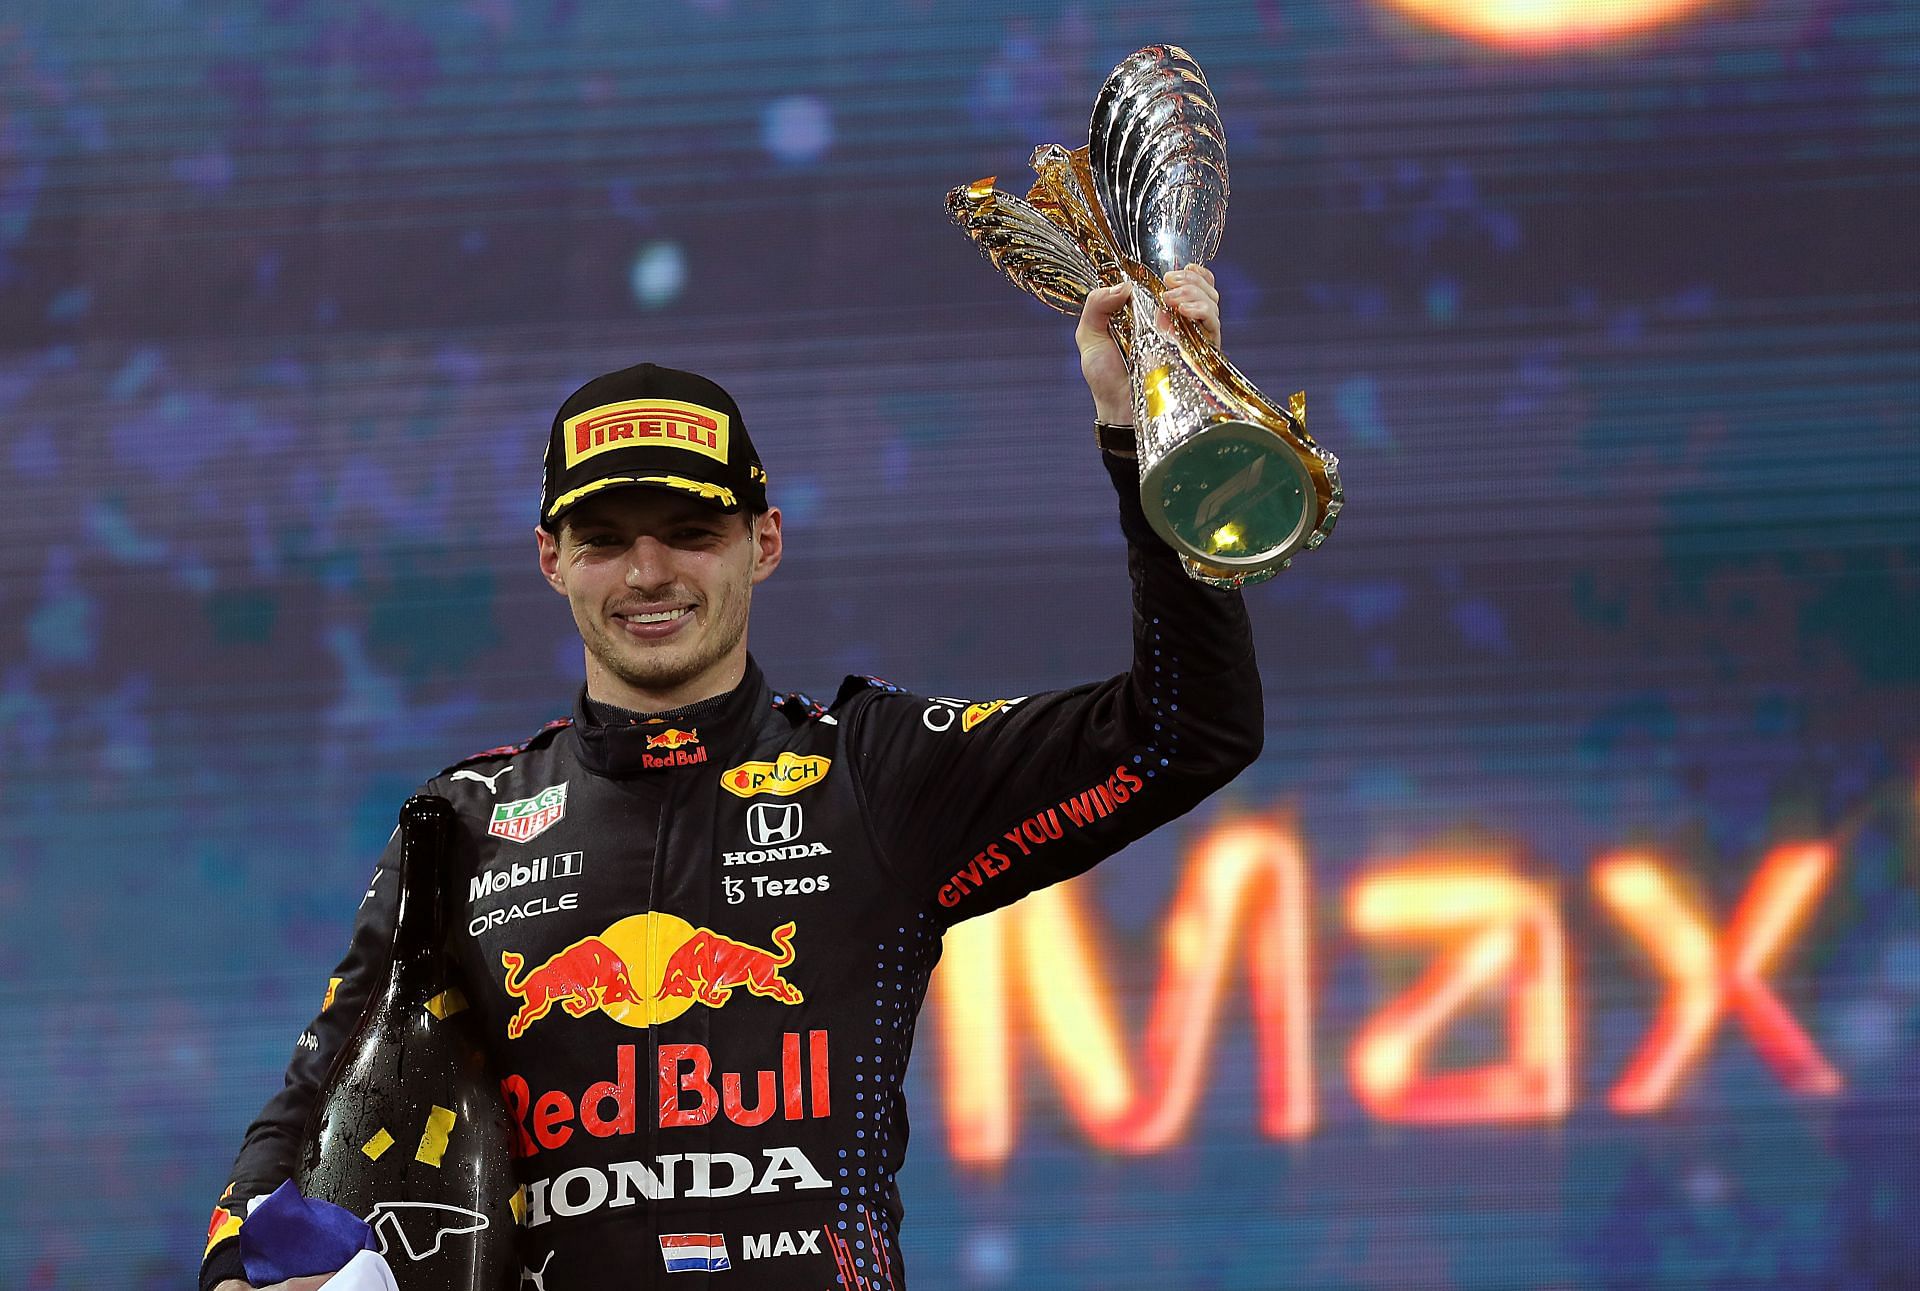 Max Verstappen is one of the youngest world champions in F1 history